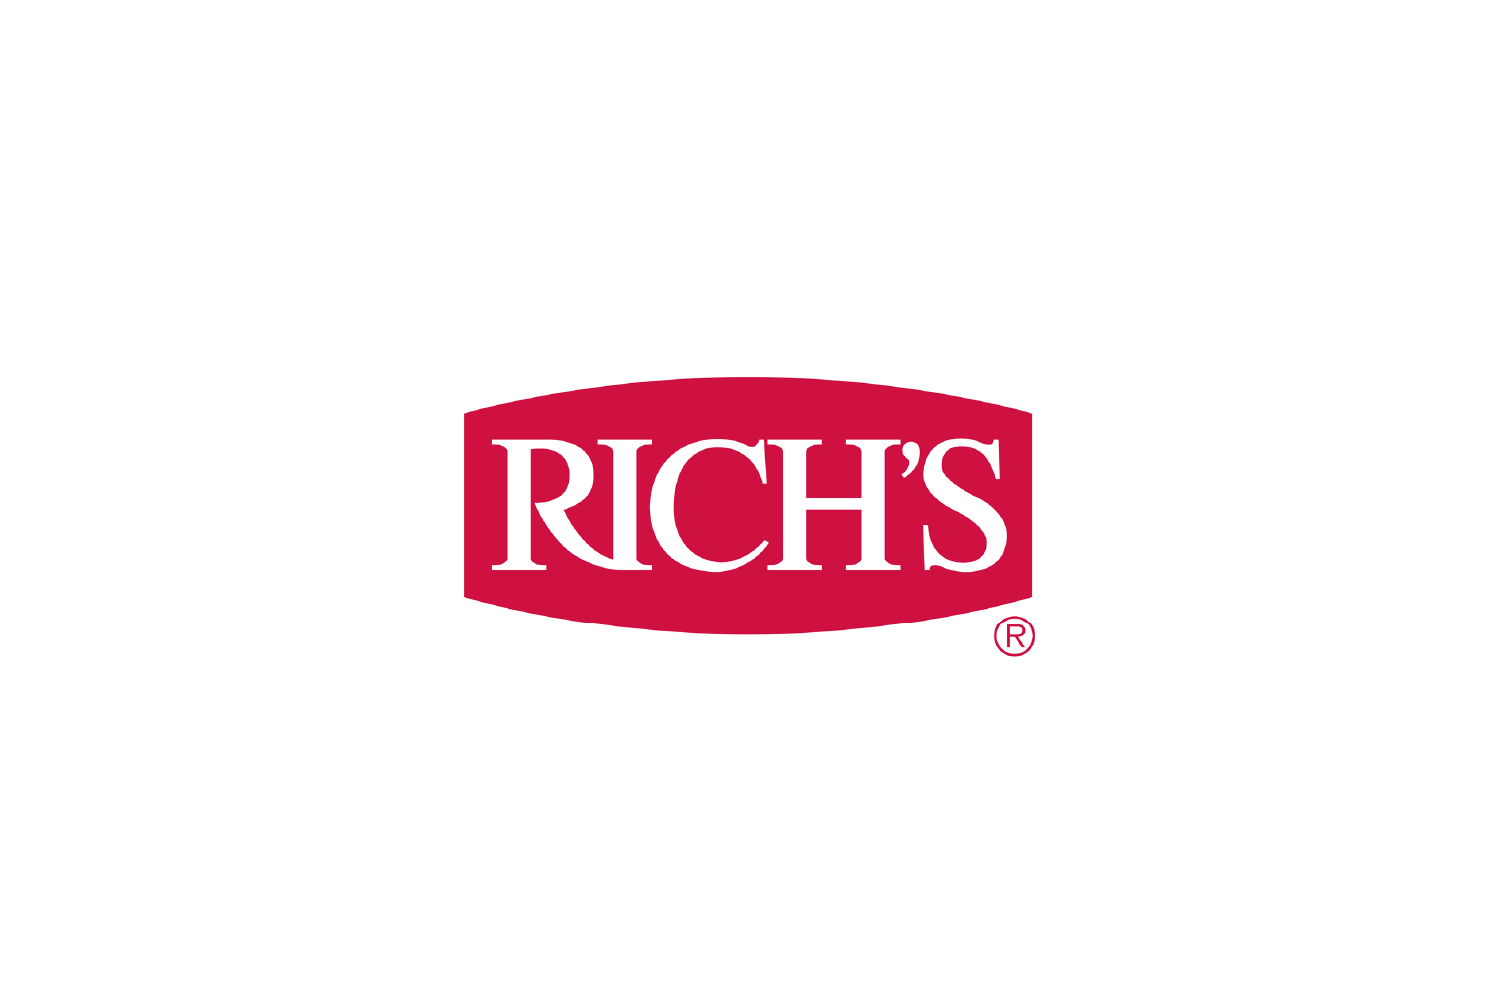 Rich's red logo on white background